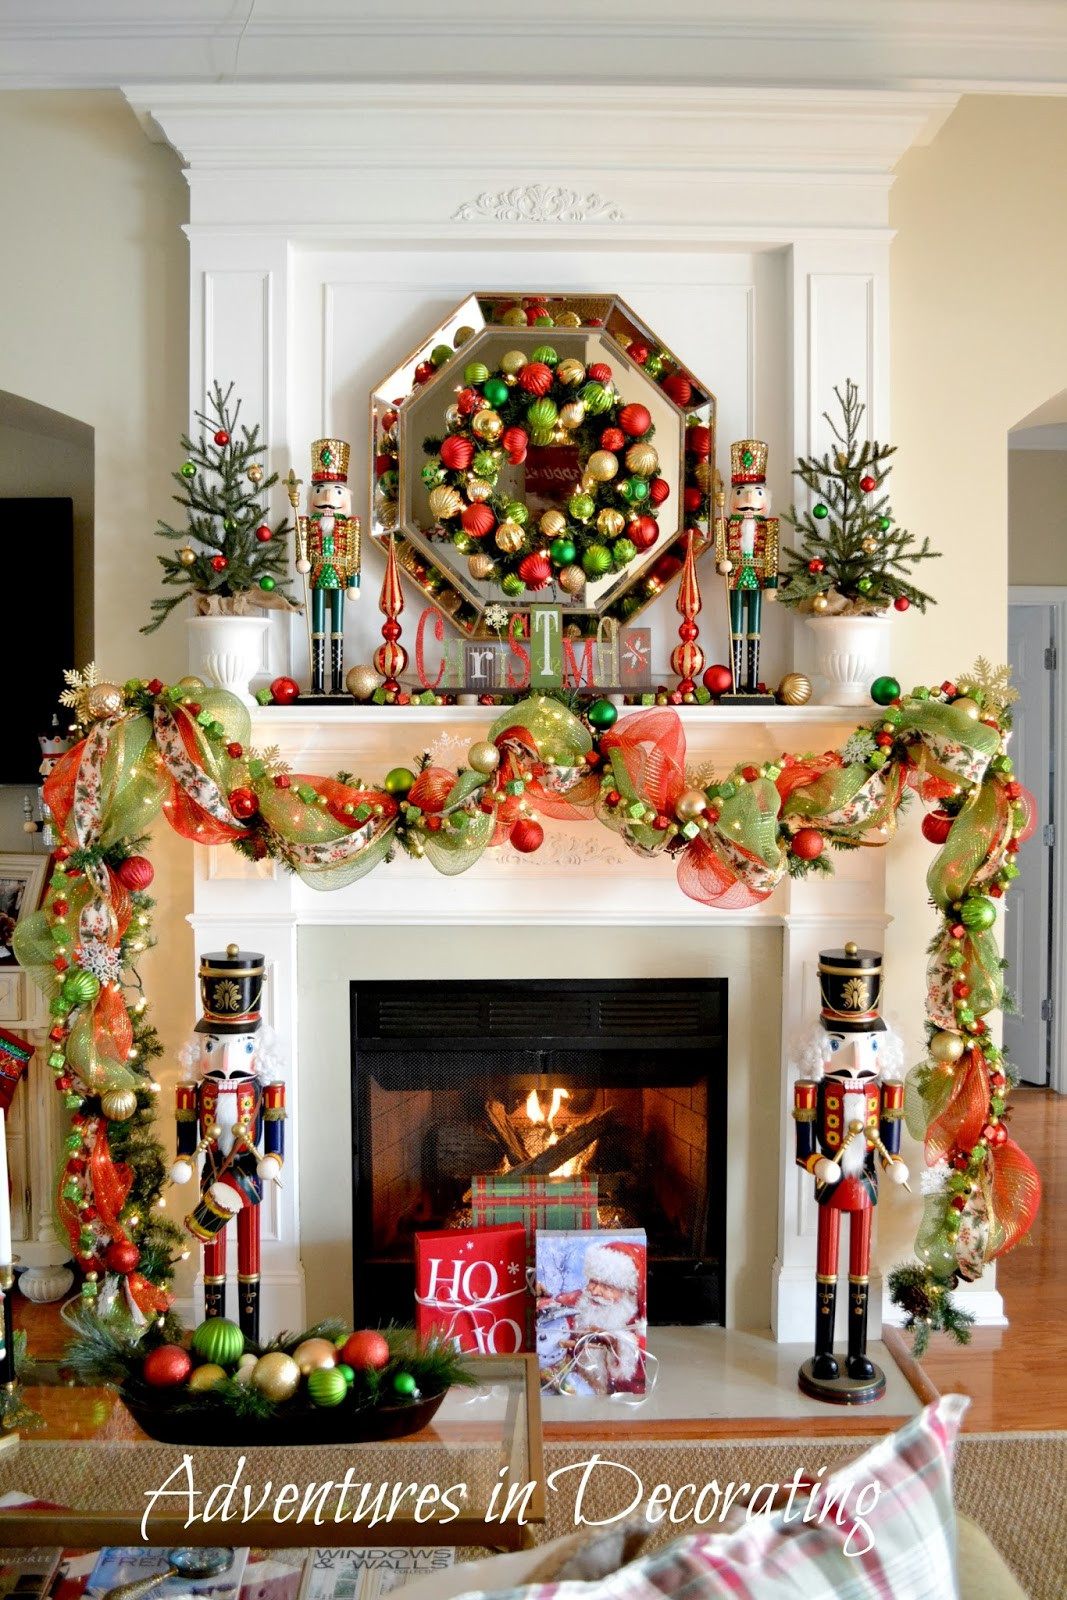 Decorating A Fireplace For Christmas
 Adventures in Decorating Our Christmas Mantel and "Deck